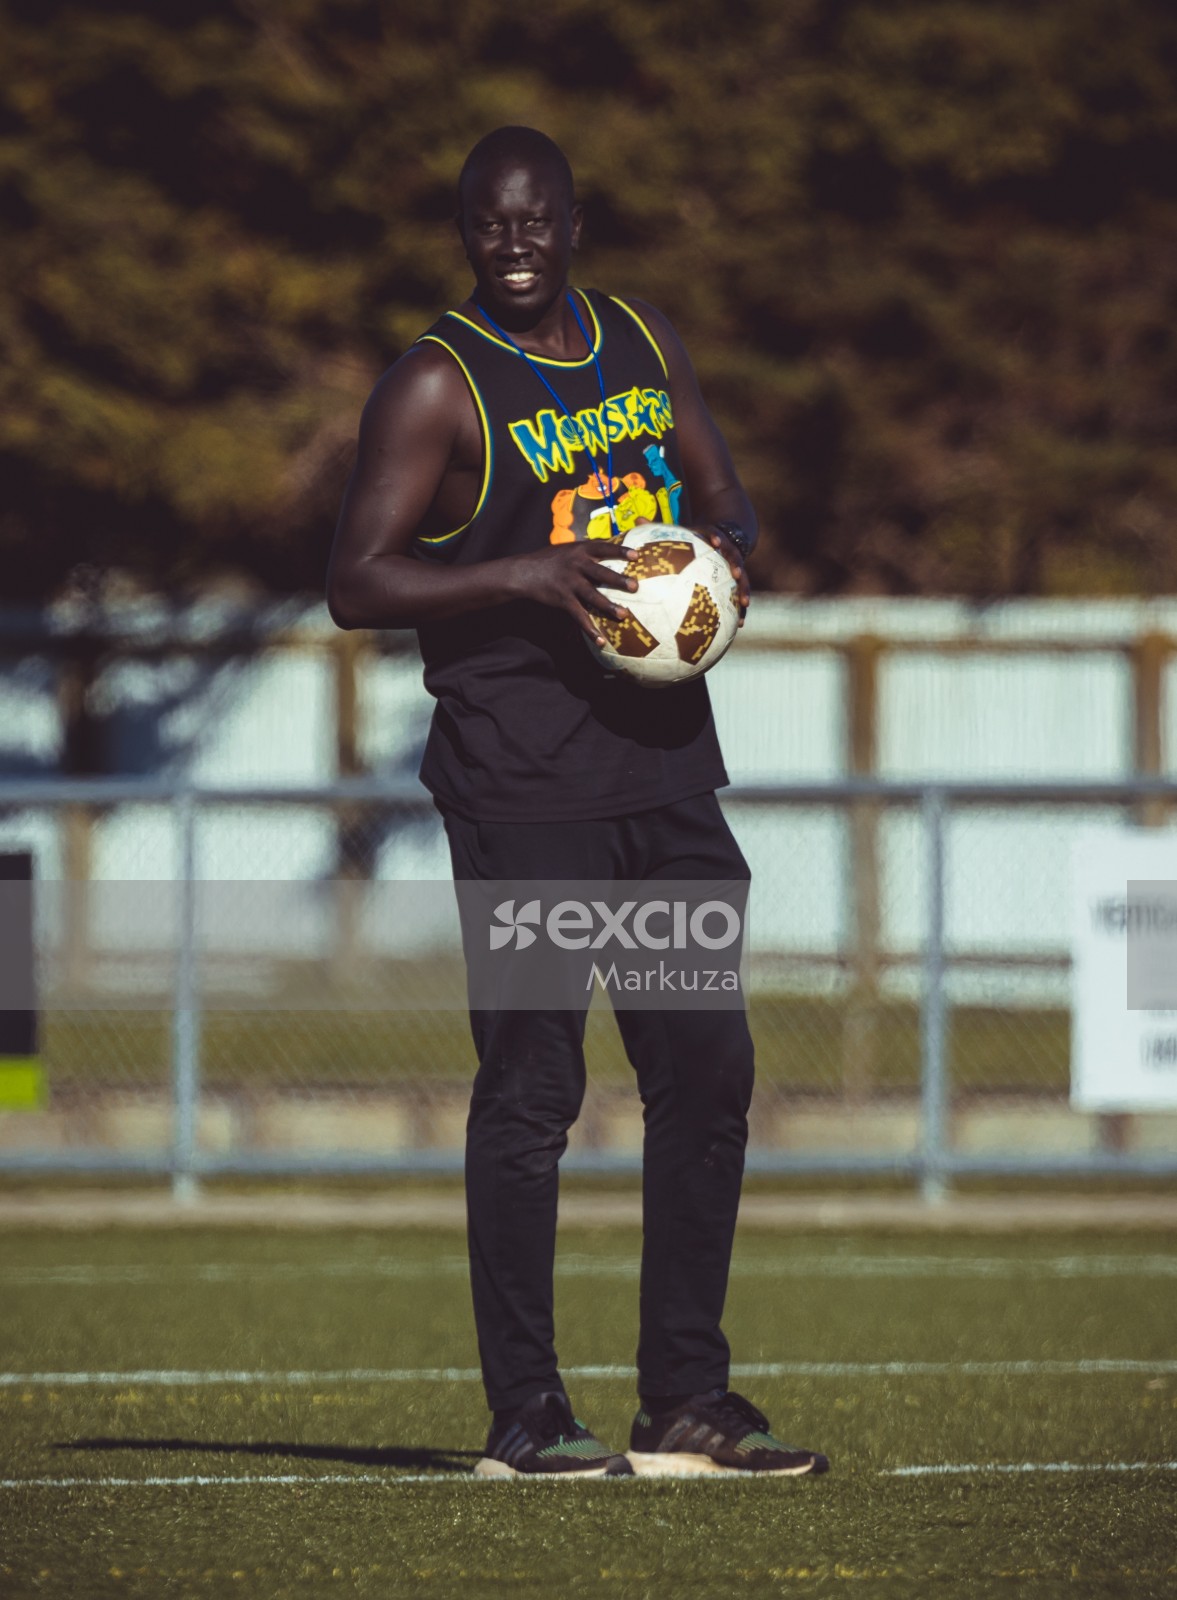 Dark skinned guy in a black tank top holding football - Sports Zone sunday league